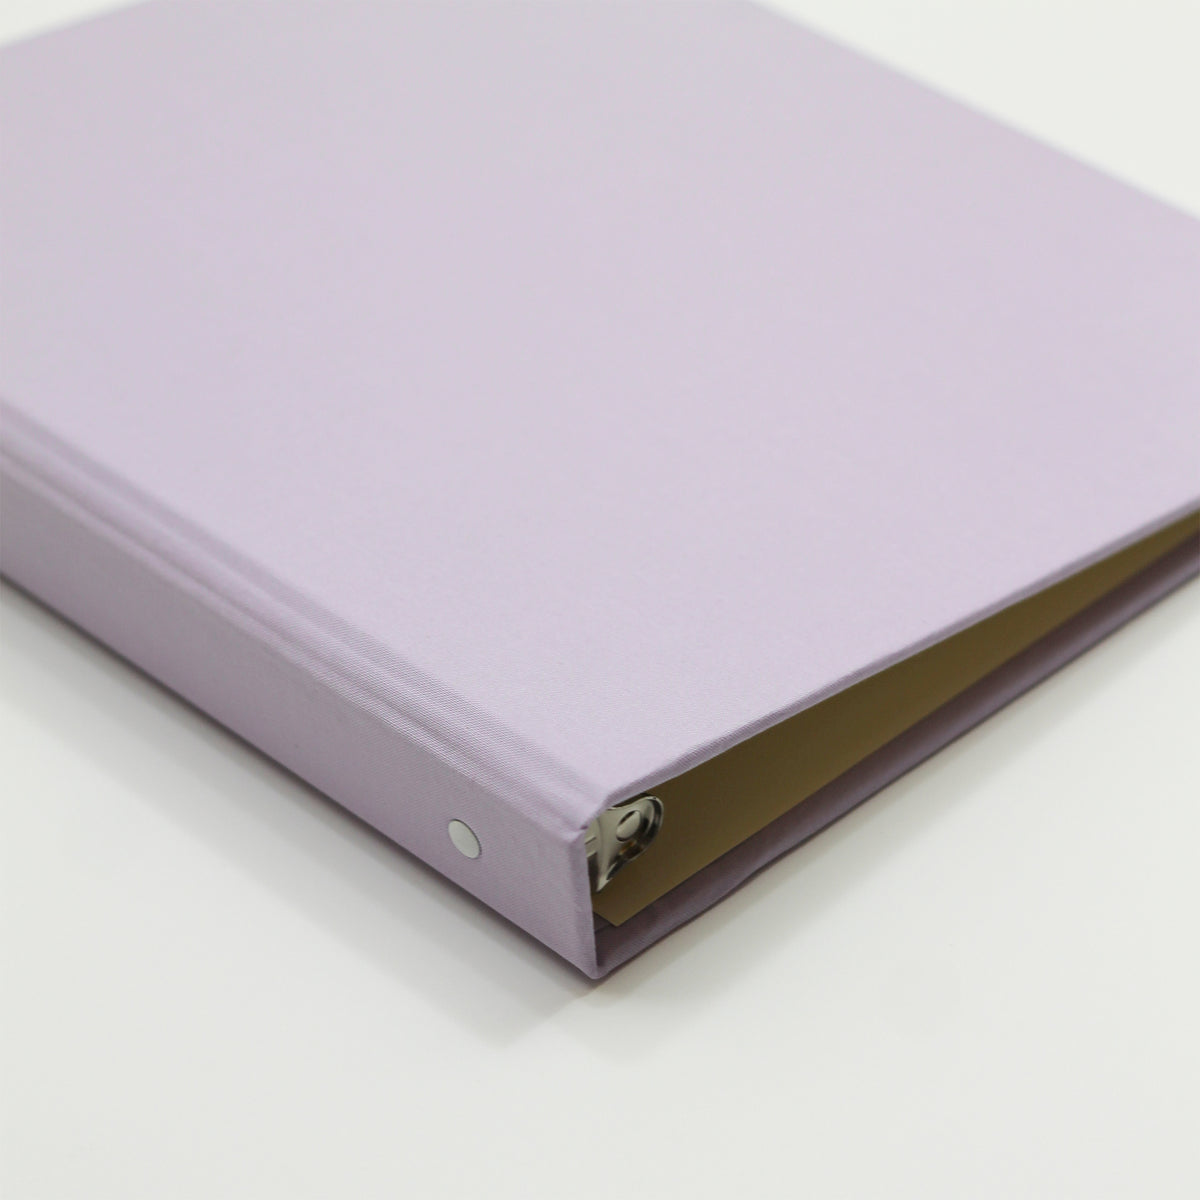 Welcome Binder with Lavender Cotton | Home | Air BNB